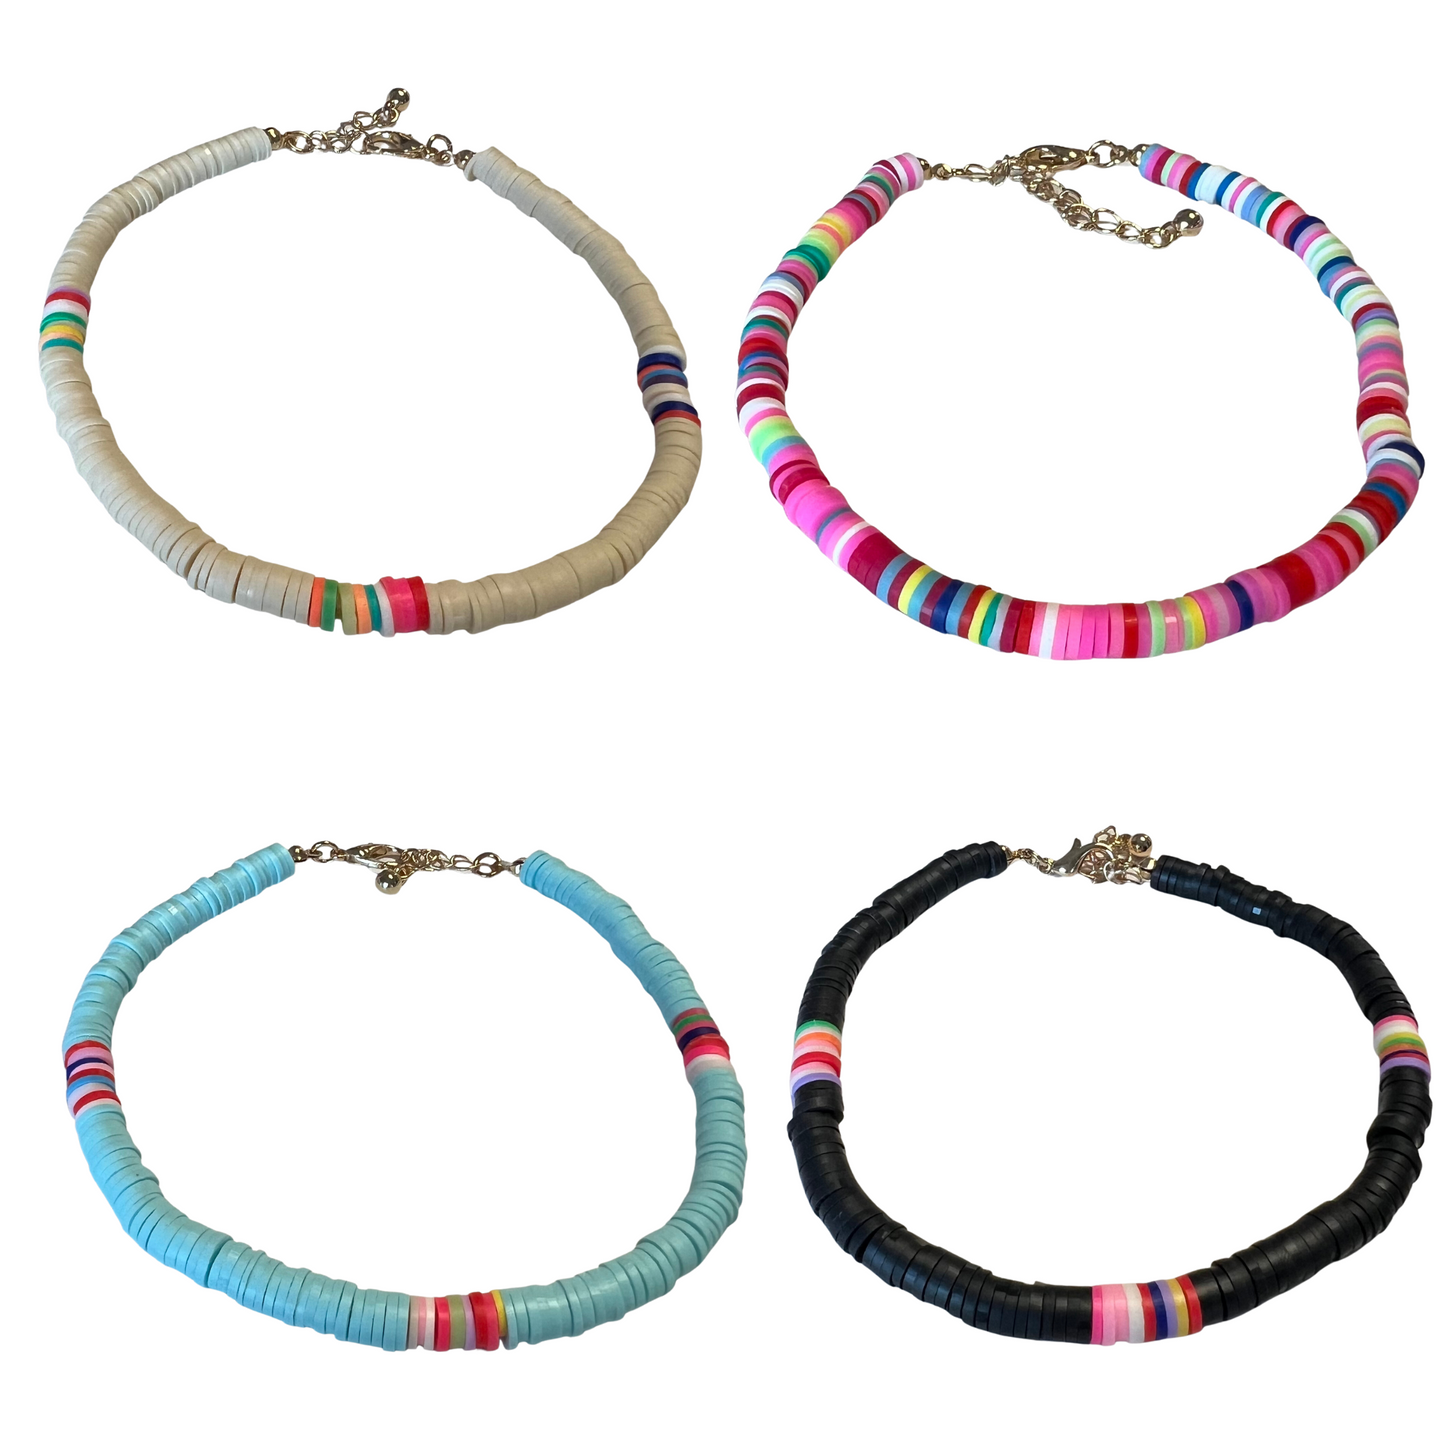 Beaded anklets. Available in multicolor, white, black, and blue